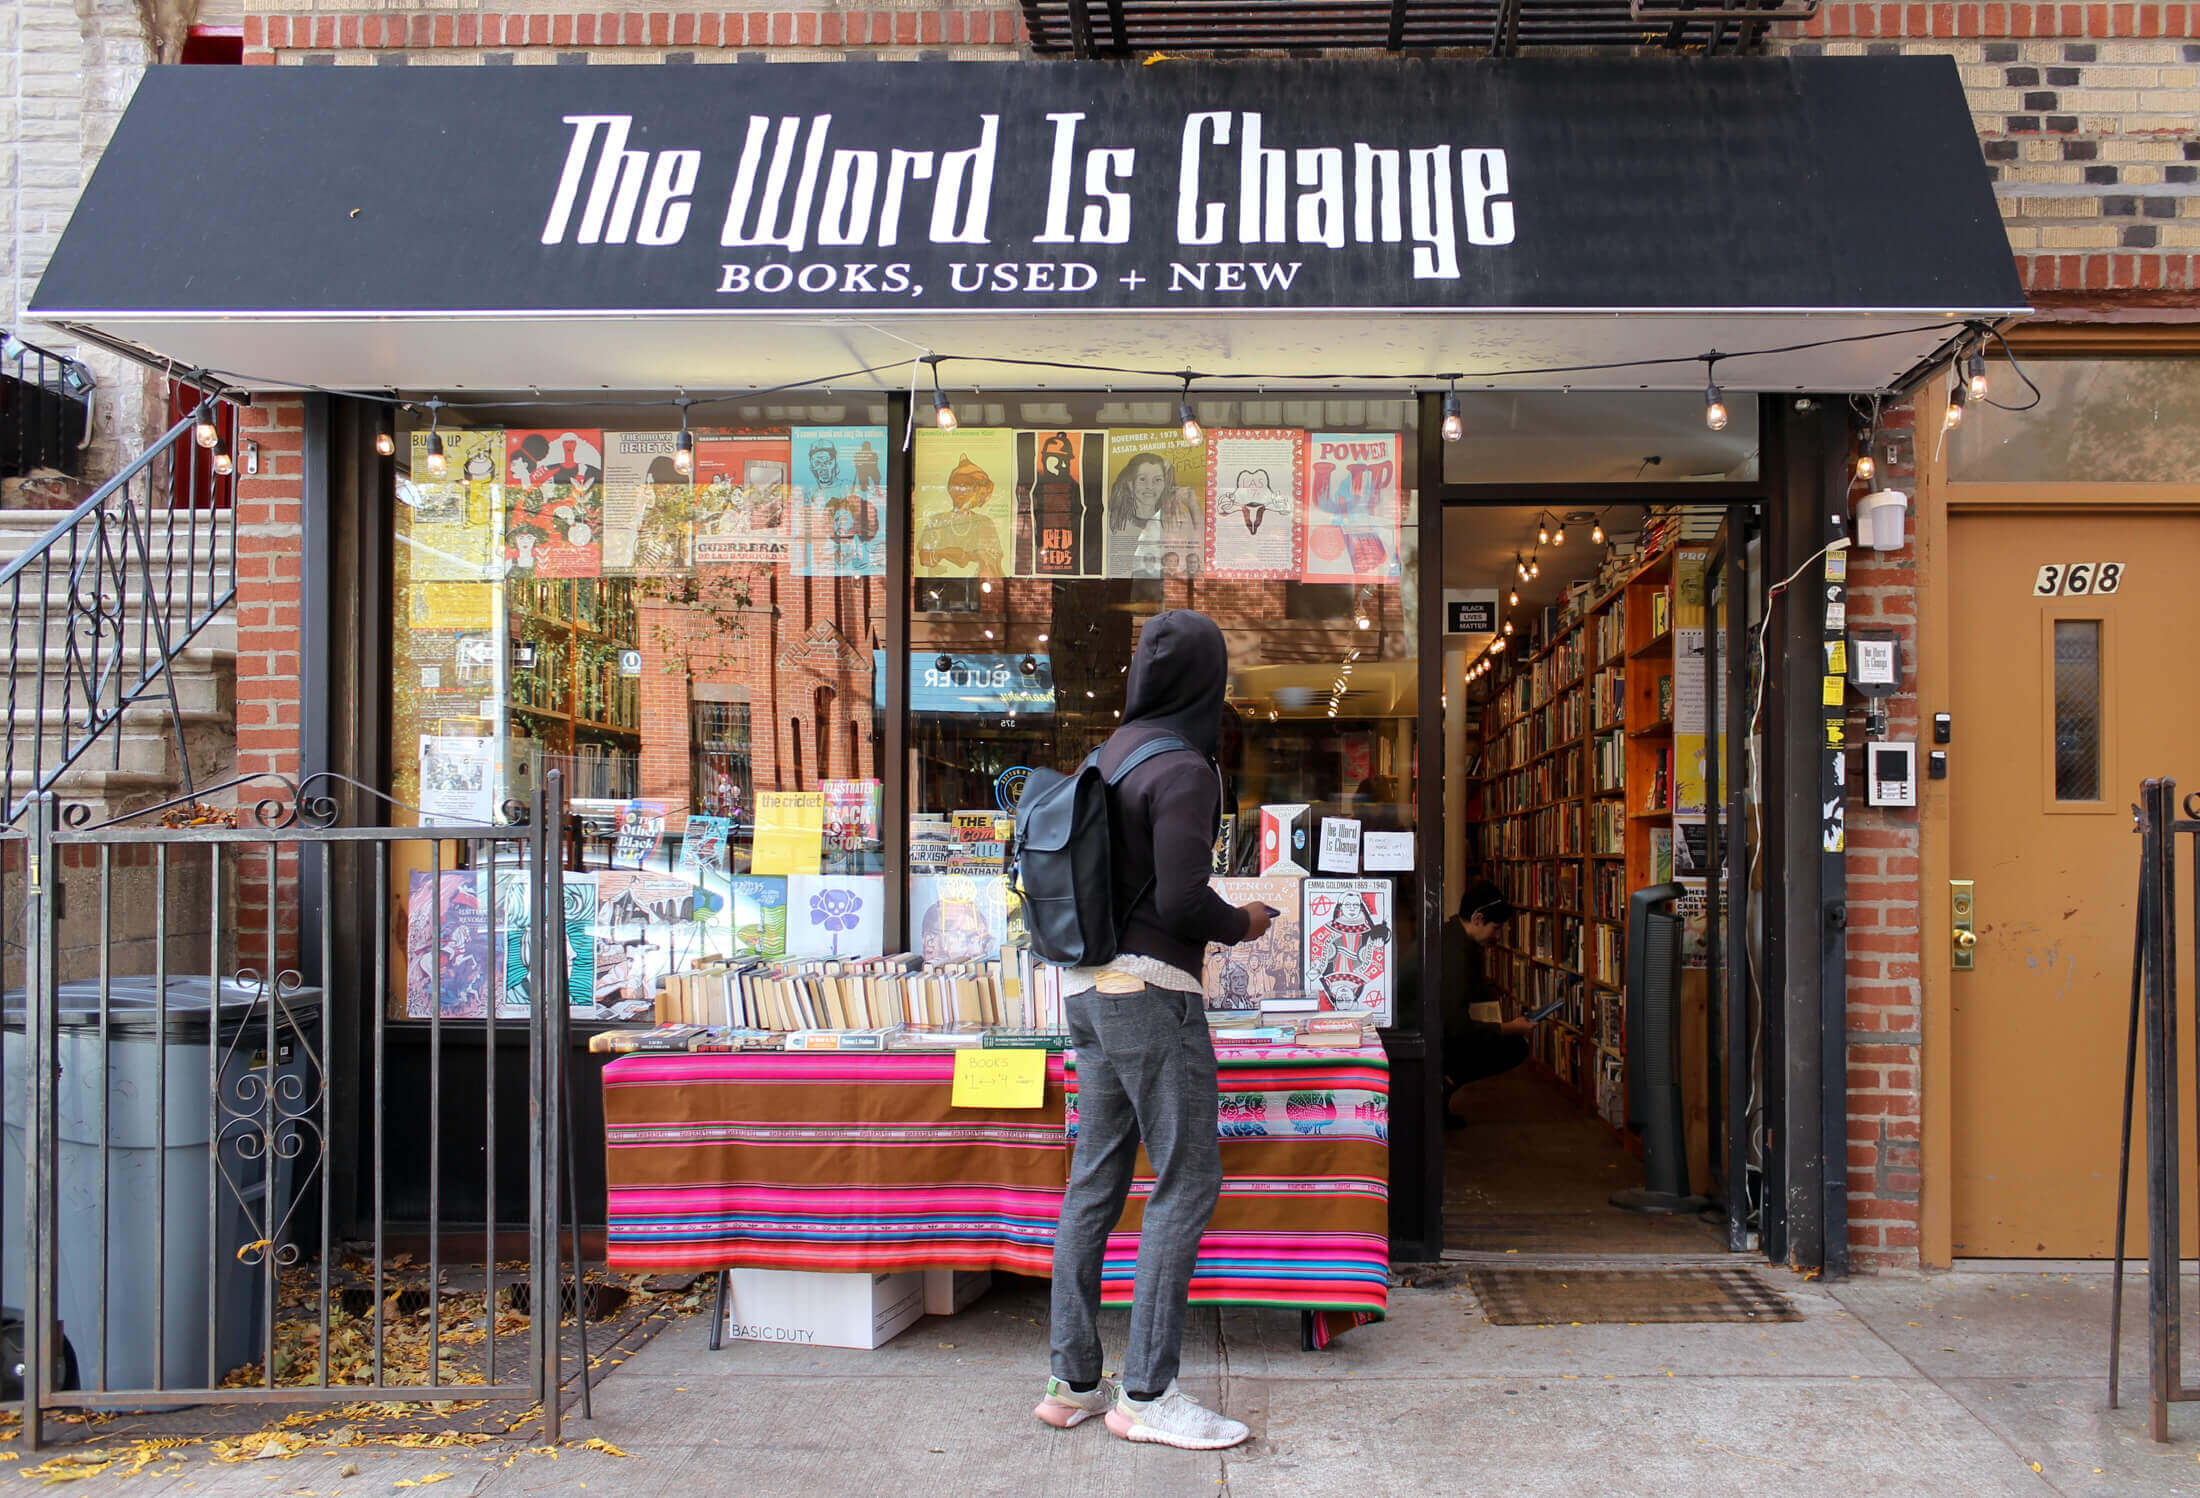 brooklyn book crawl - exterior of word is change